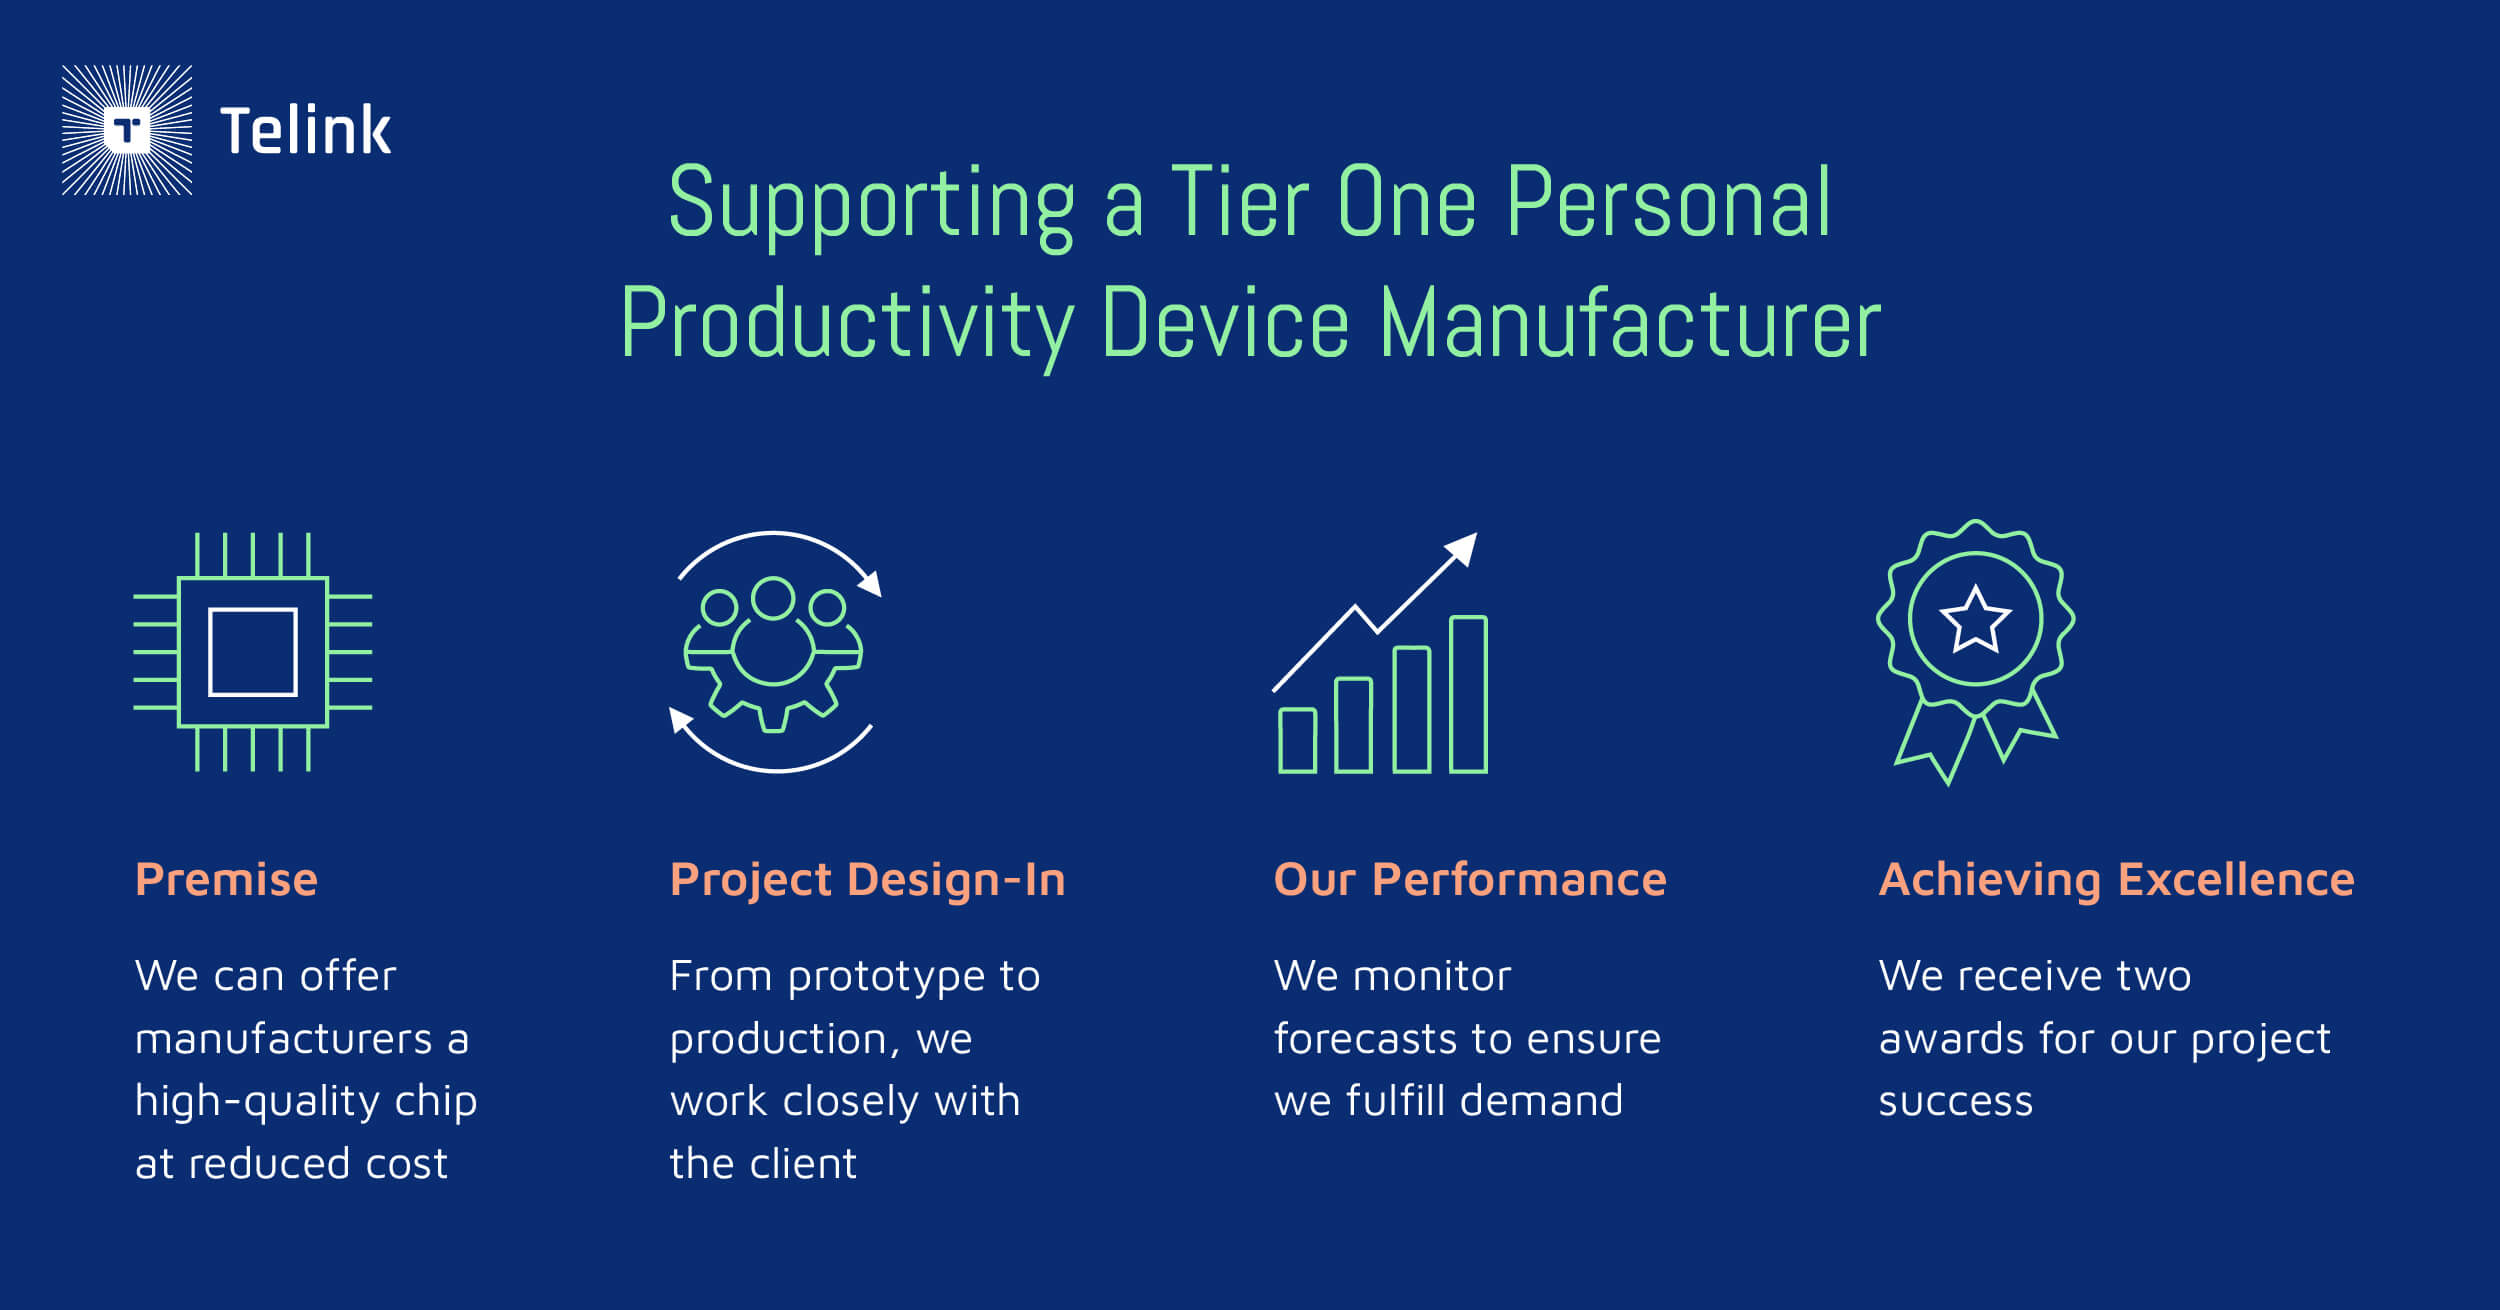 The process of supporting a tier one personal productivity device manufacturer